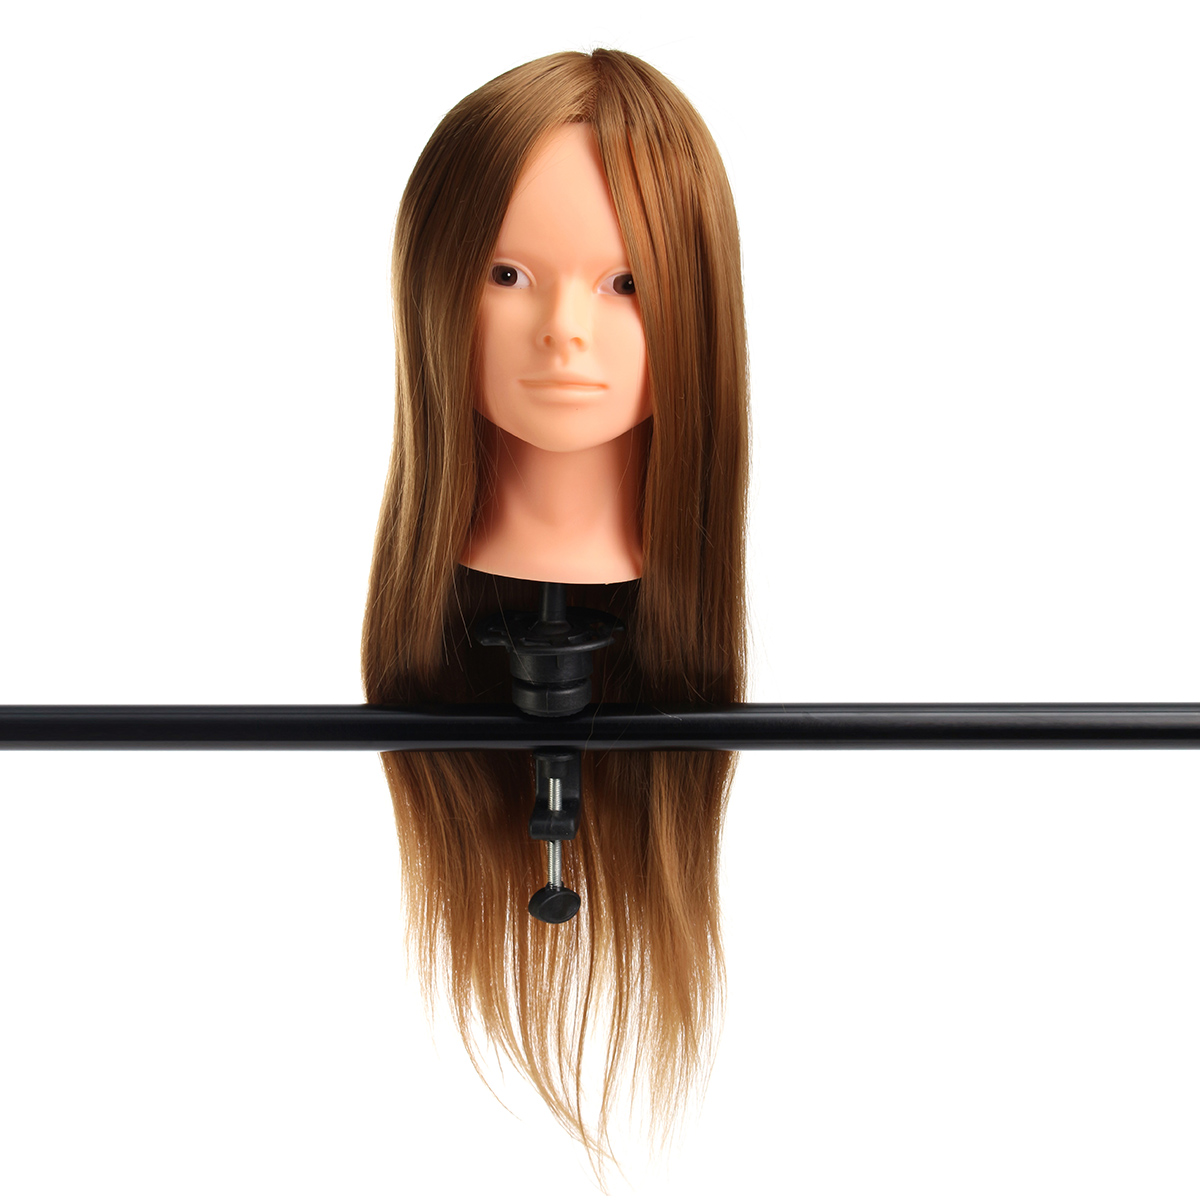 

24" 30% Real Hair Training Mannequin Head Model Makeup